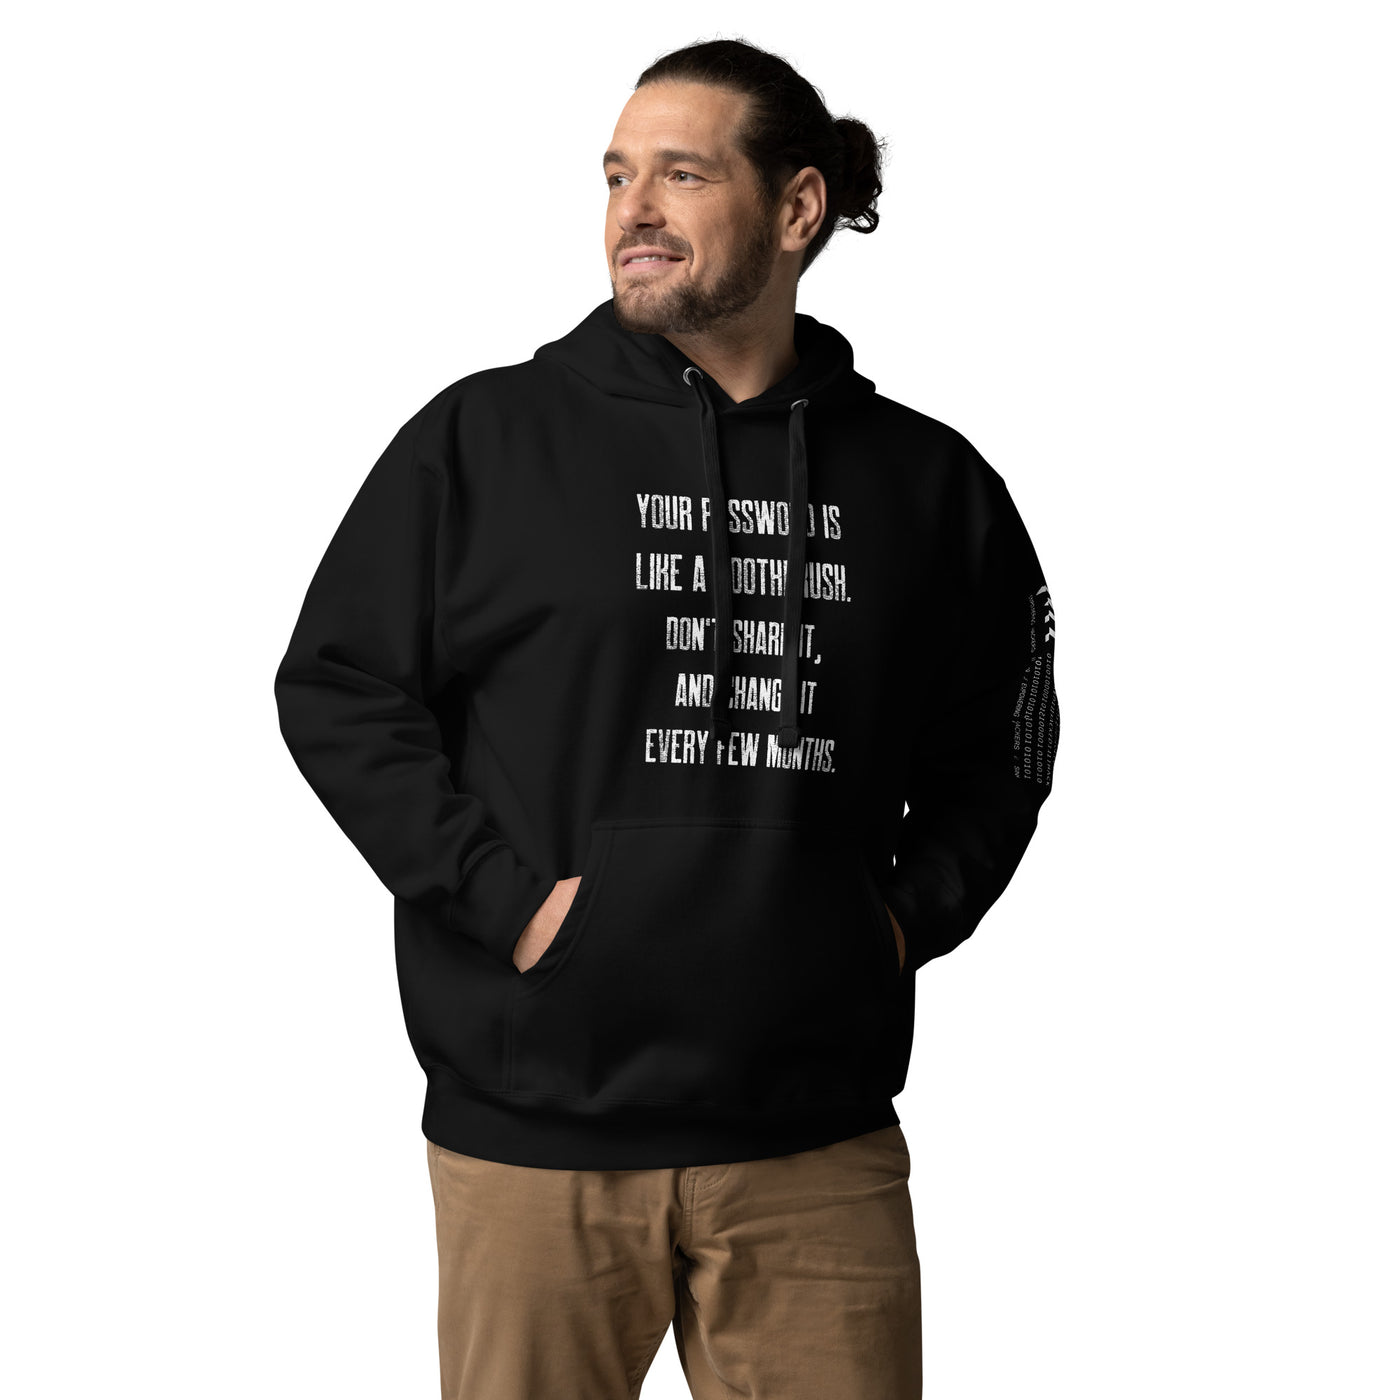 Your password is like a toothbrush V1 - Unisex Hoodie